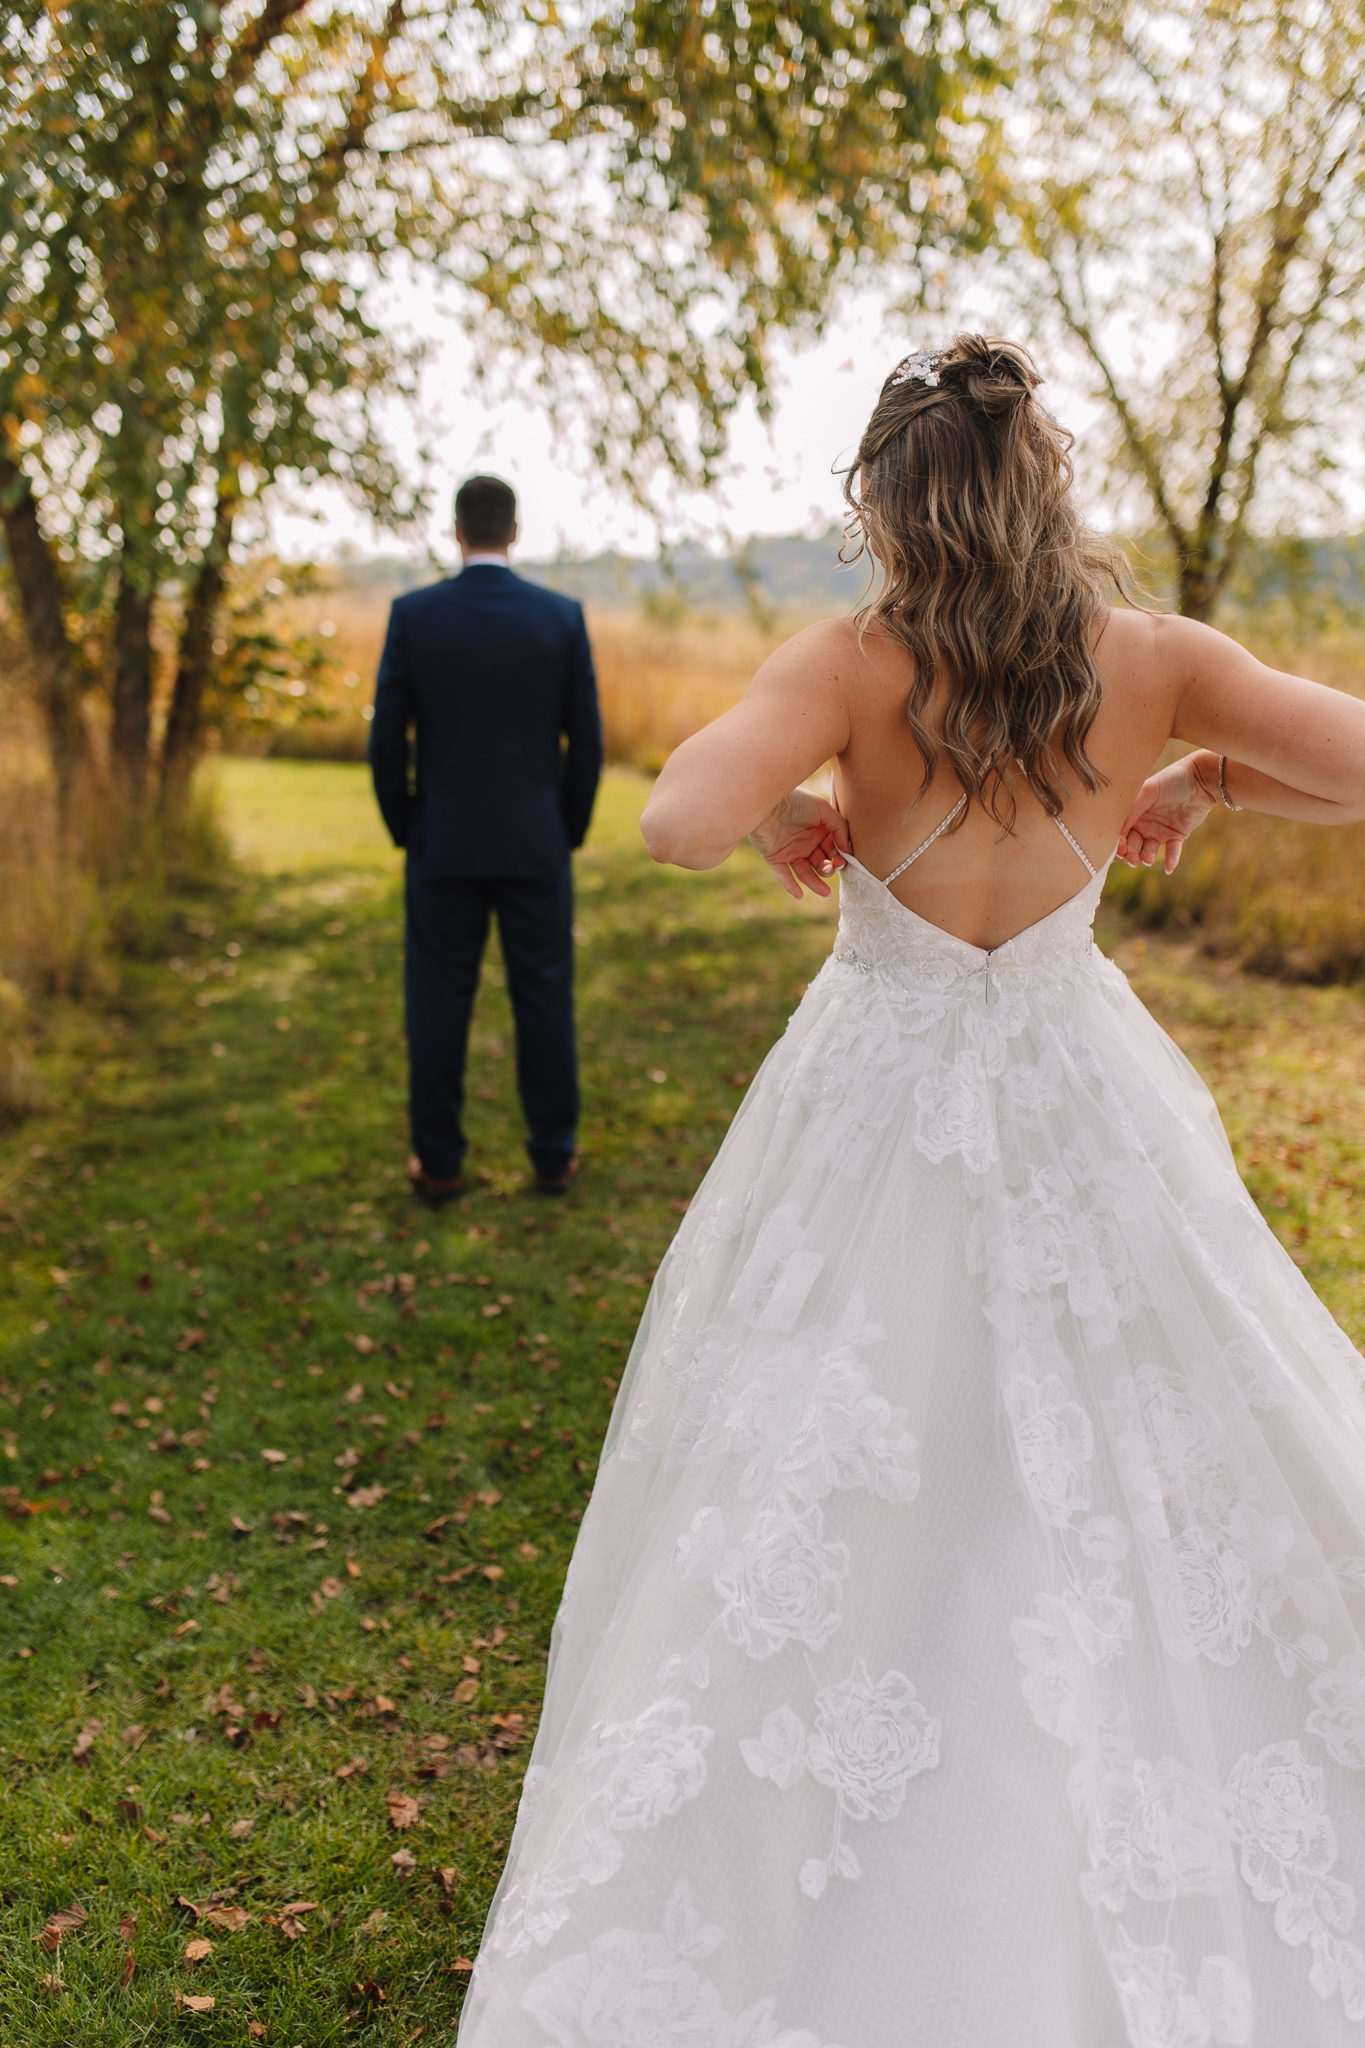 Bride in an open back wedding dress with criss cross straps standing behind her groom while he faces away waiting to turn around and see his bride for the first time in her wedding dress